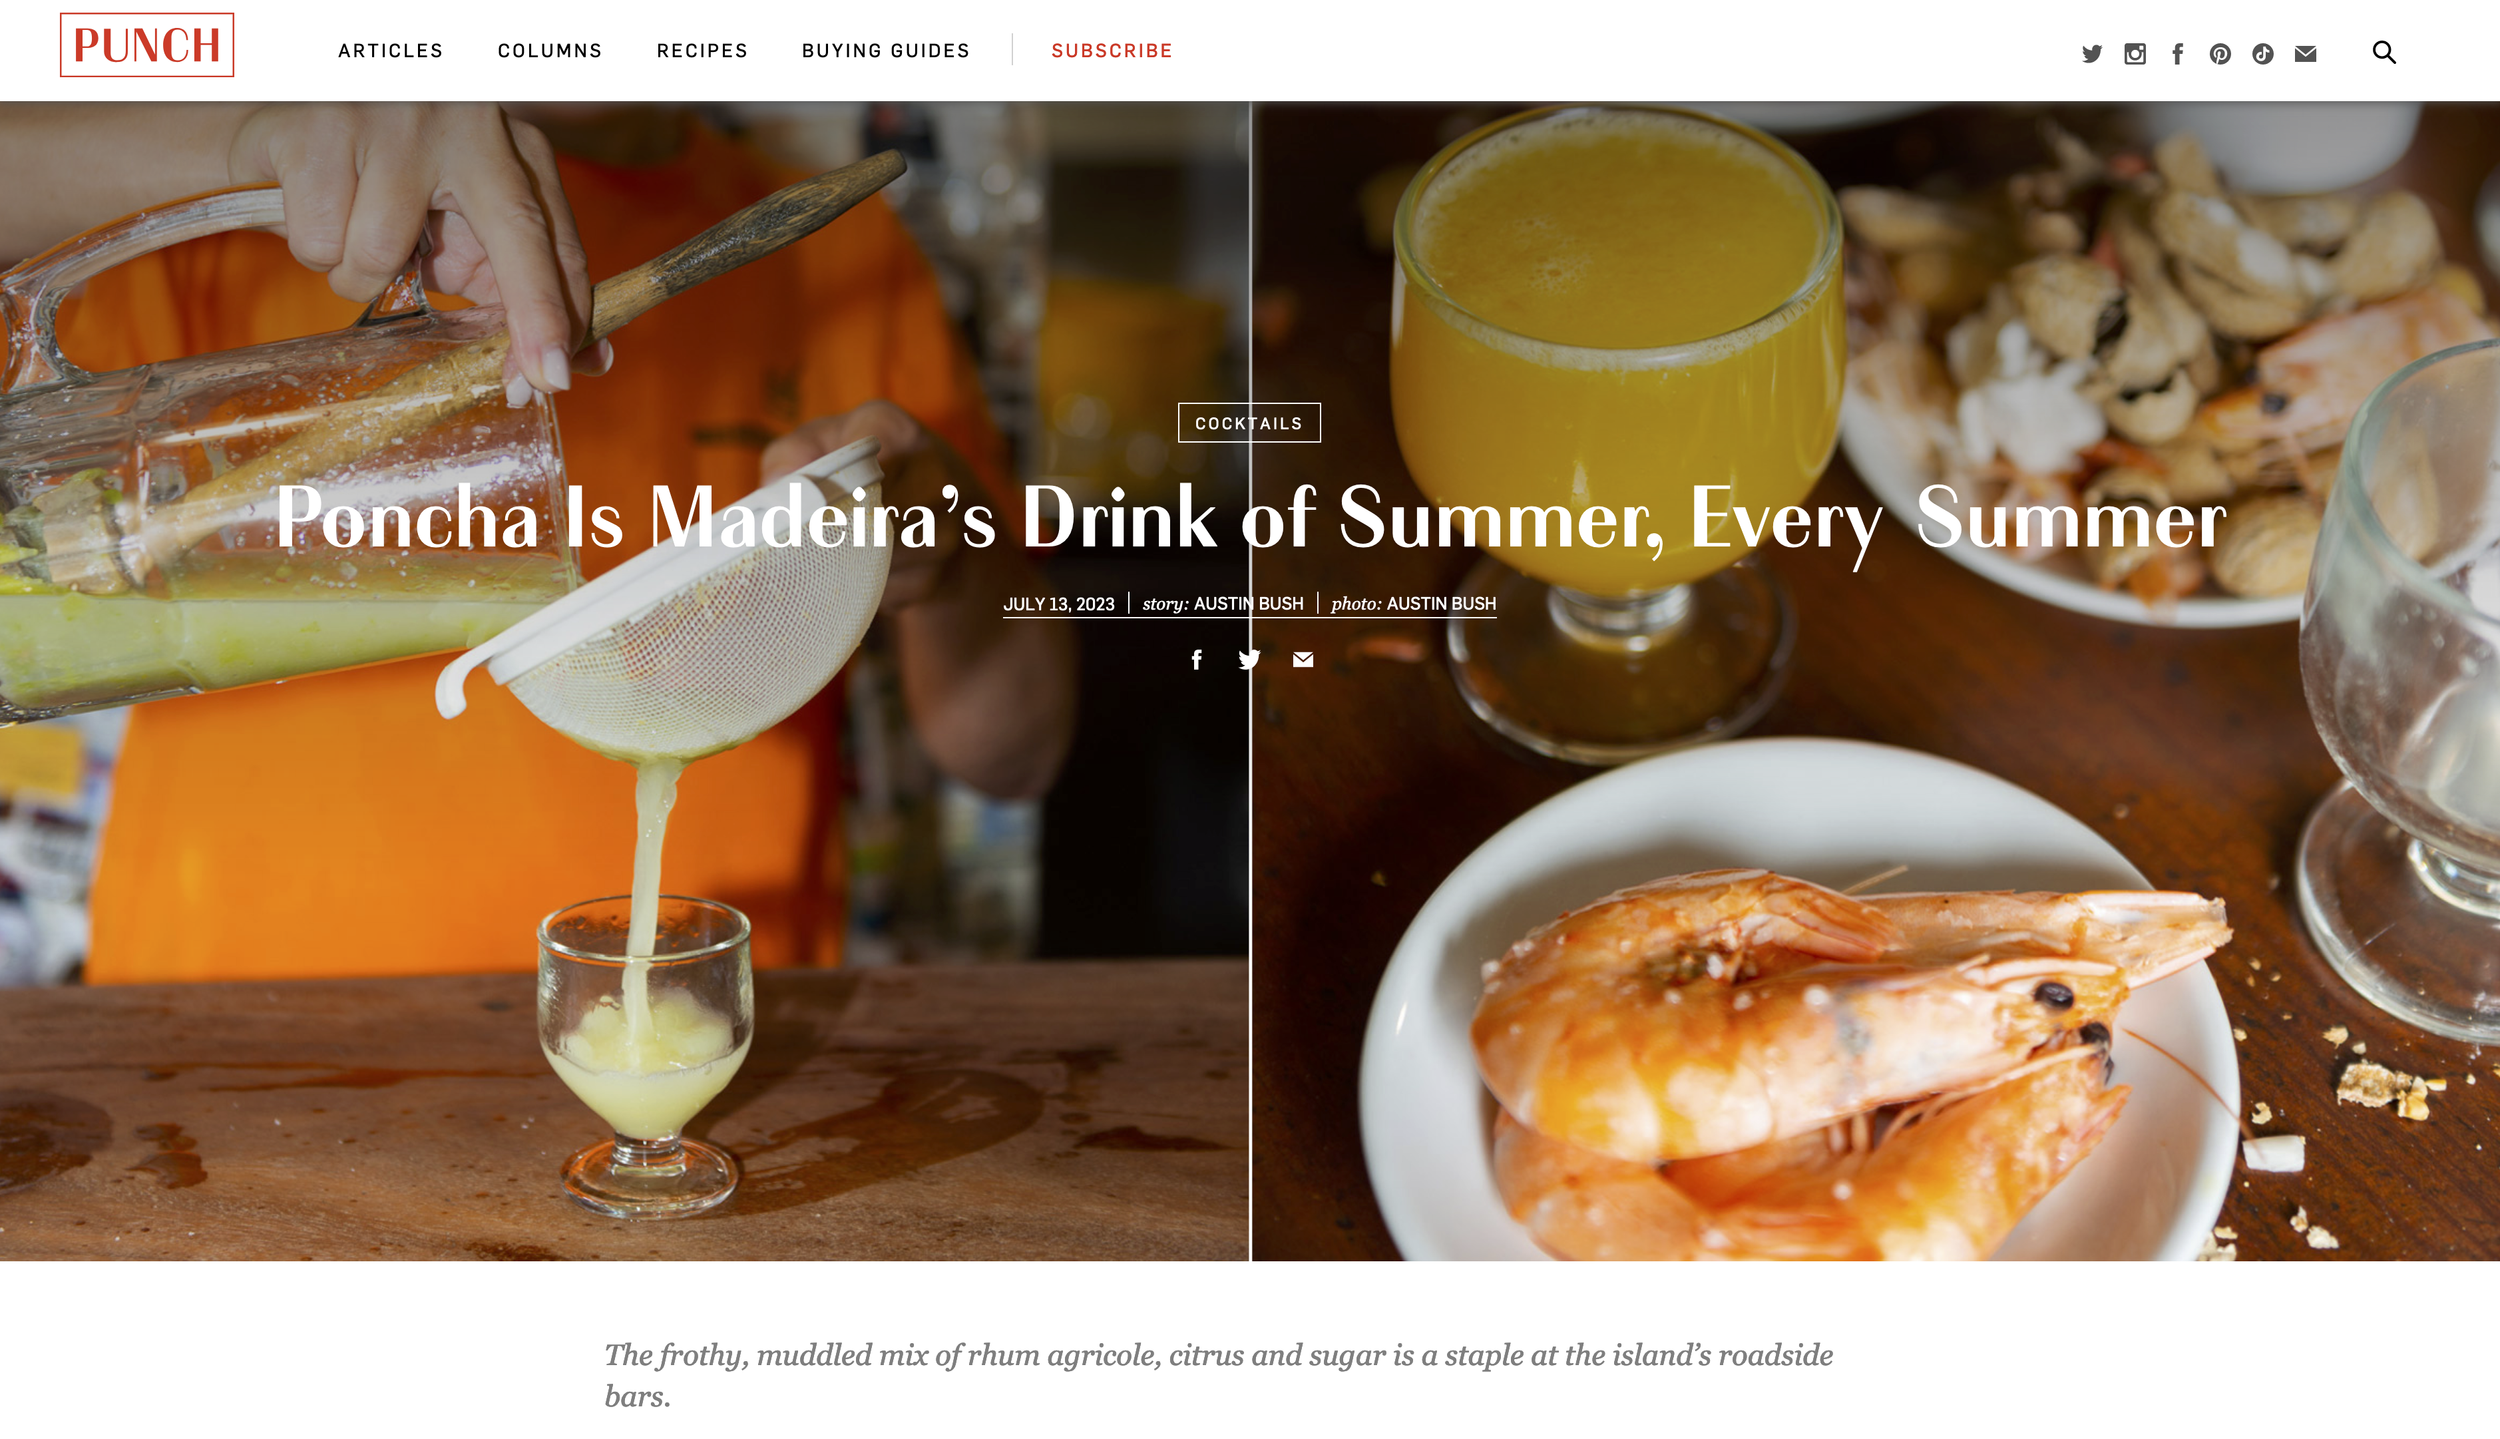  Click here to go to article: “ Poncha Is Madeira’s Drink of Summer, Every Summer ,” text and photos, PUNCH 